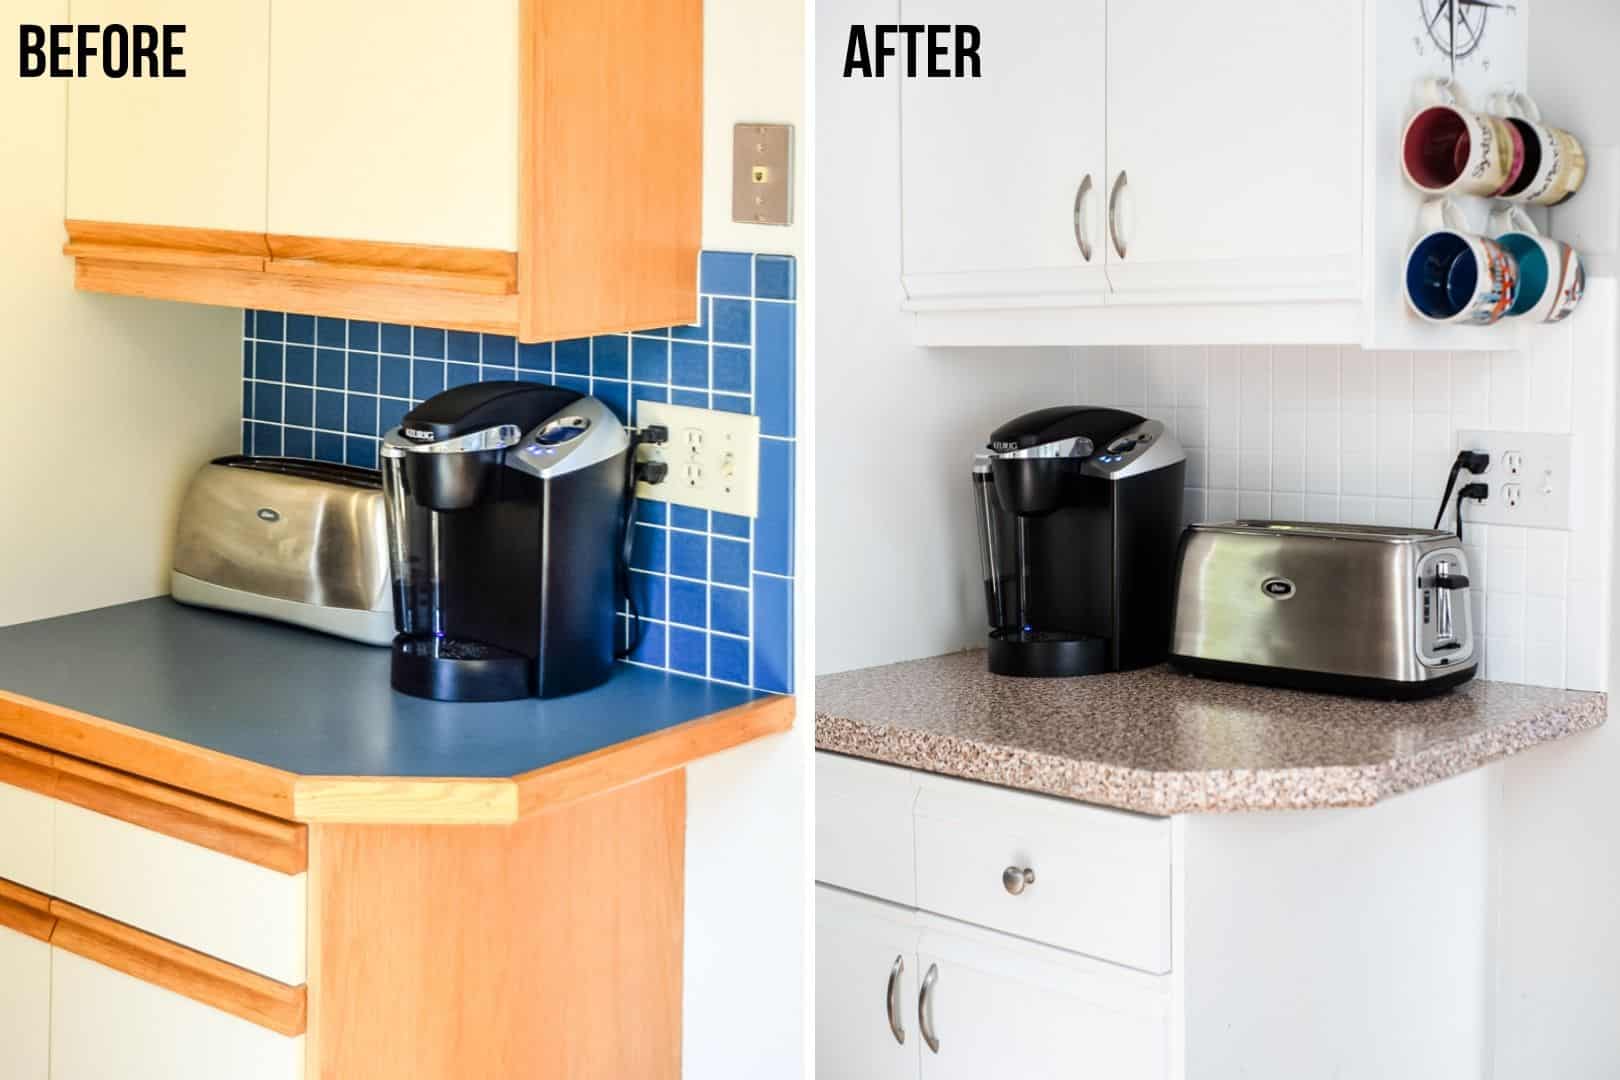 80s kitchen before and after painting cabinets and backsplash